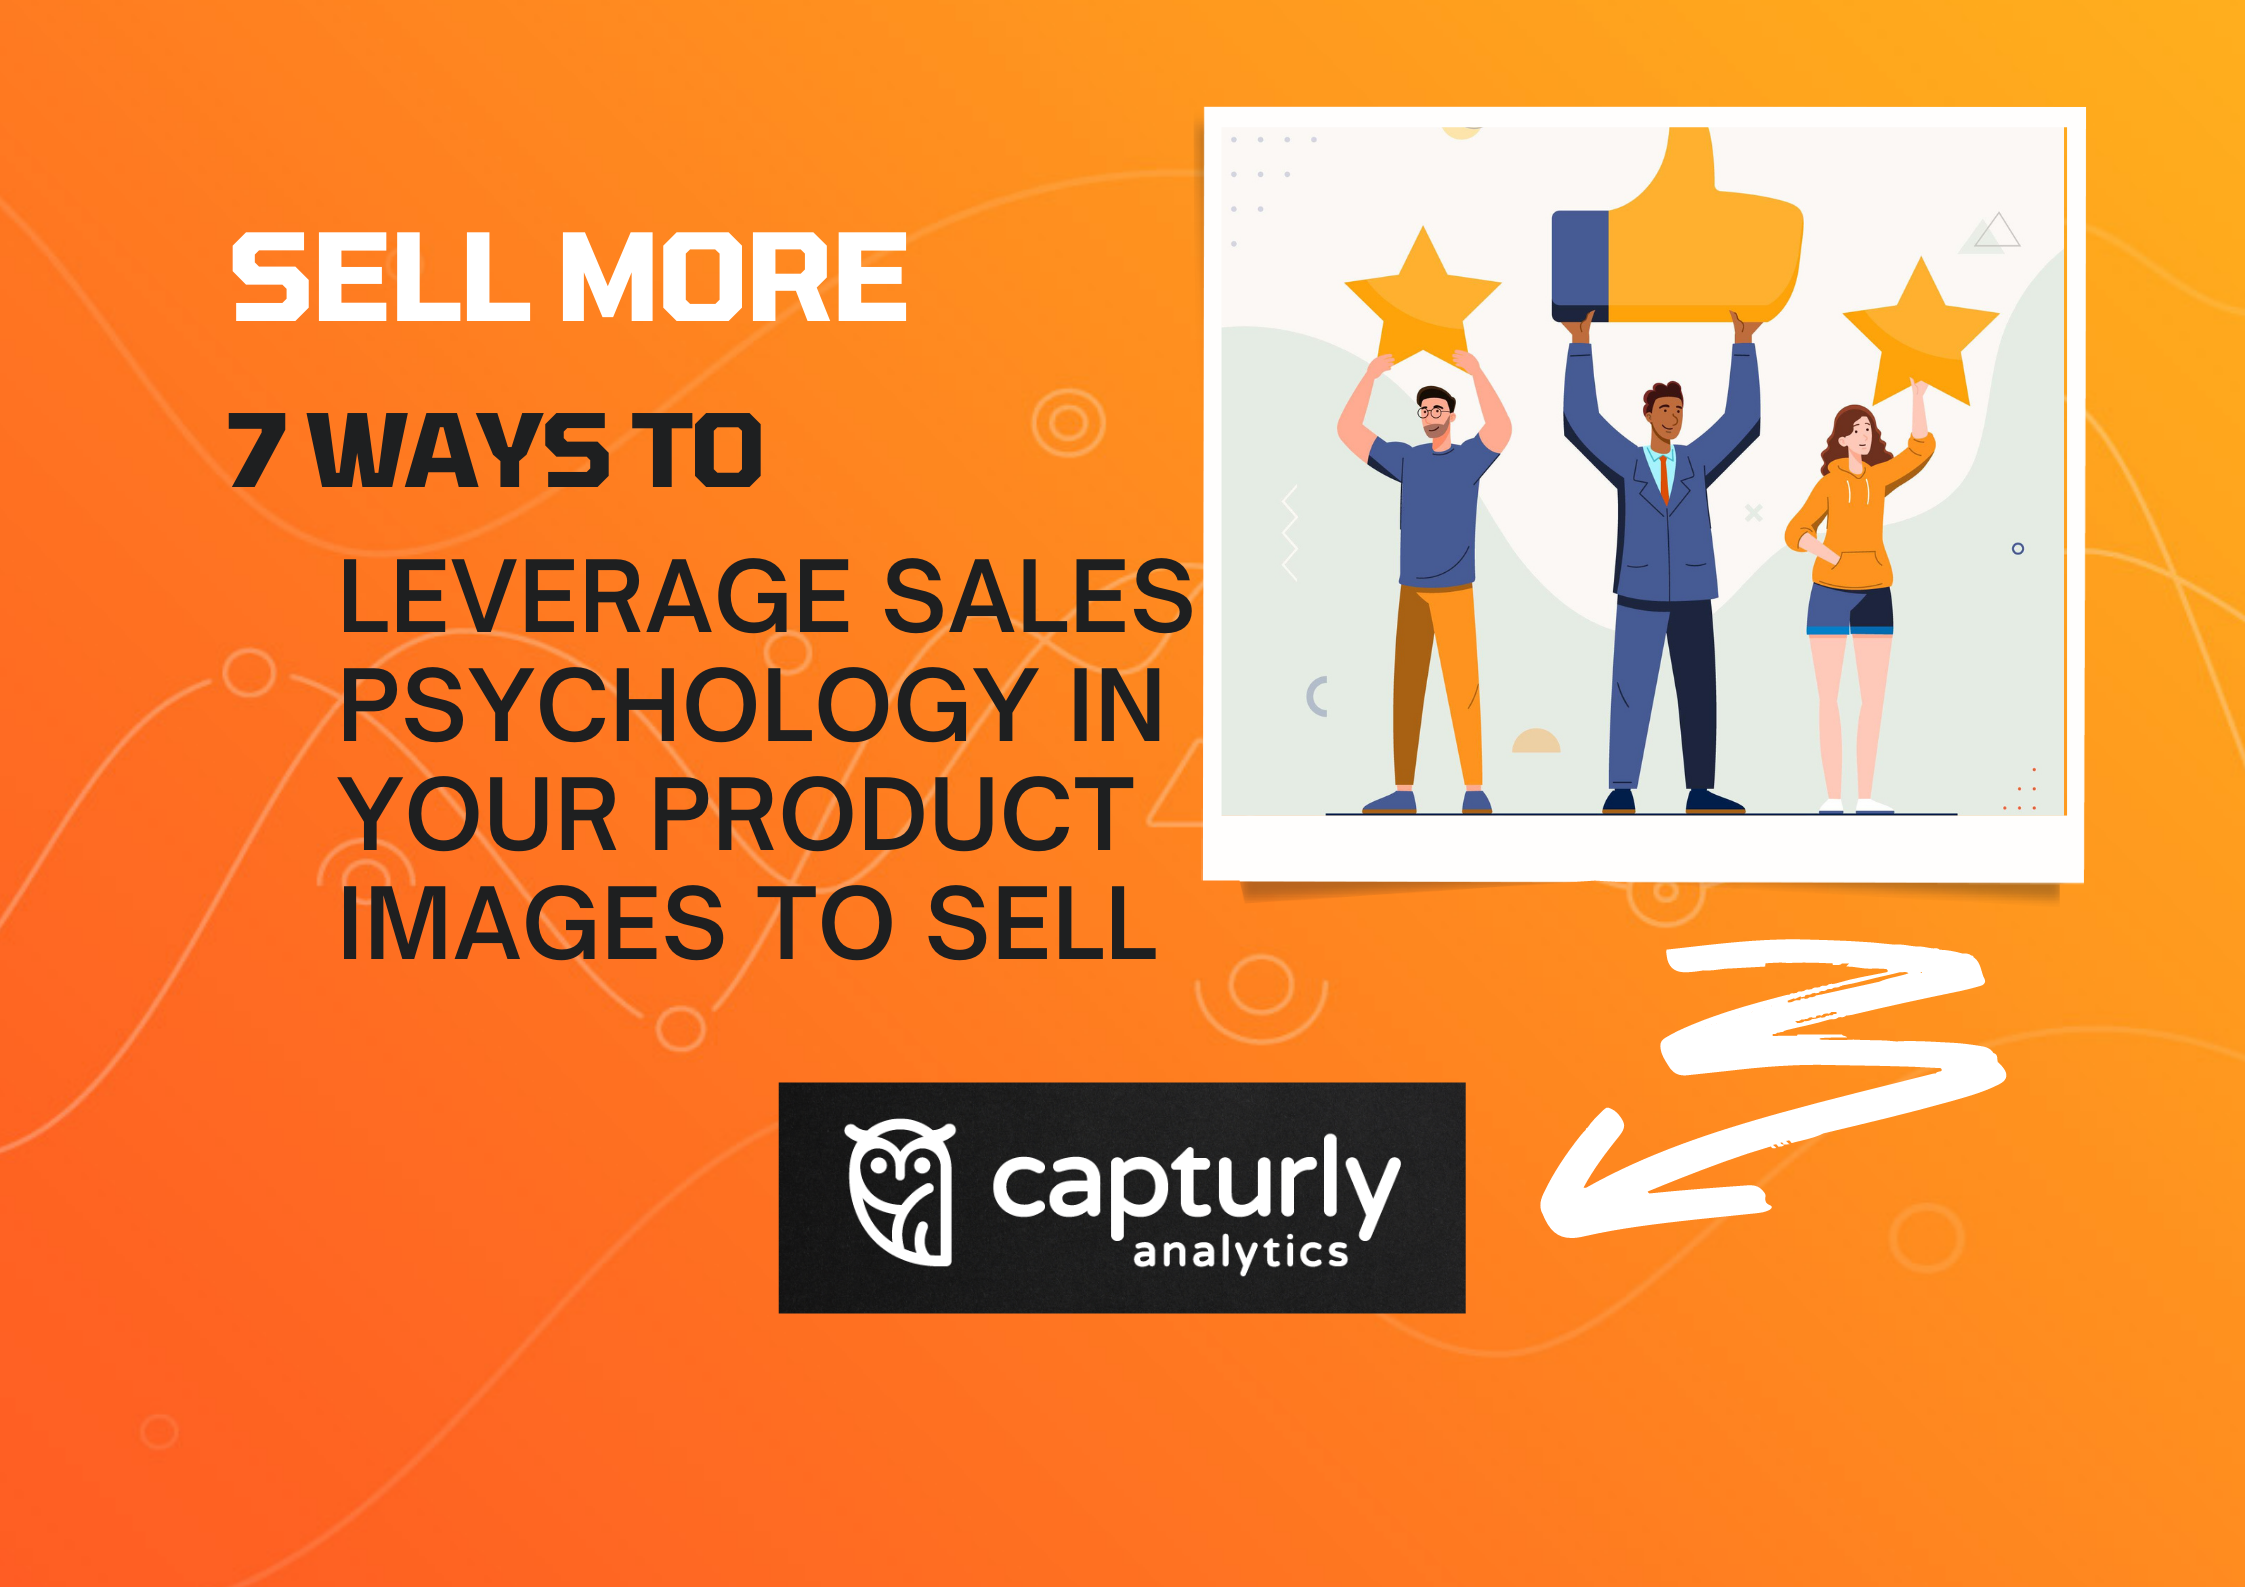 7 Ways to Leverage Sales Psychology in Your Product Images to Sell More